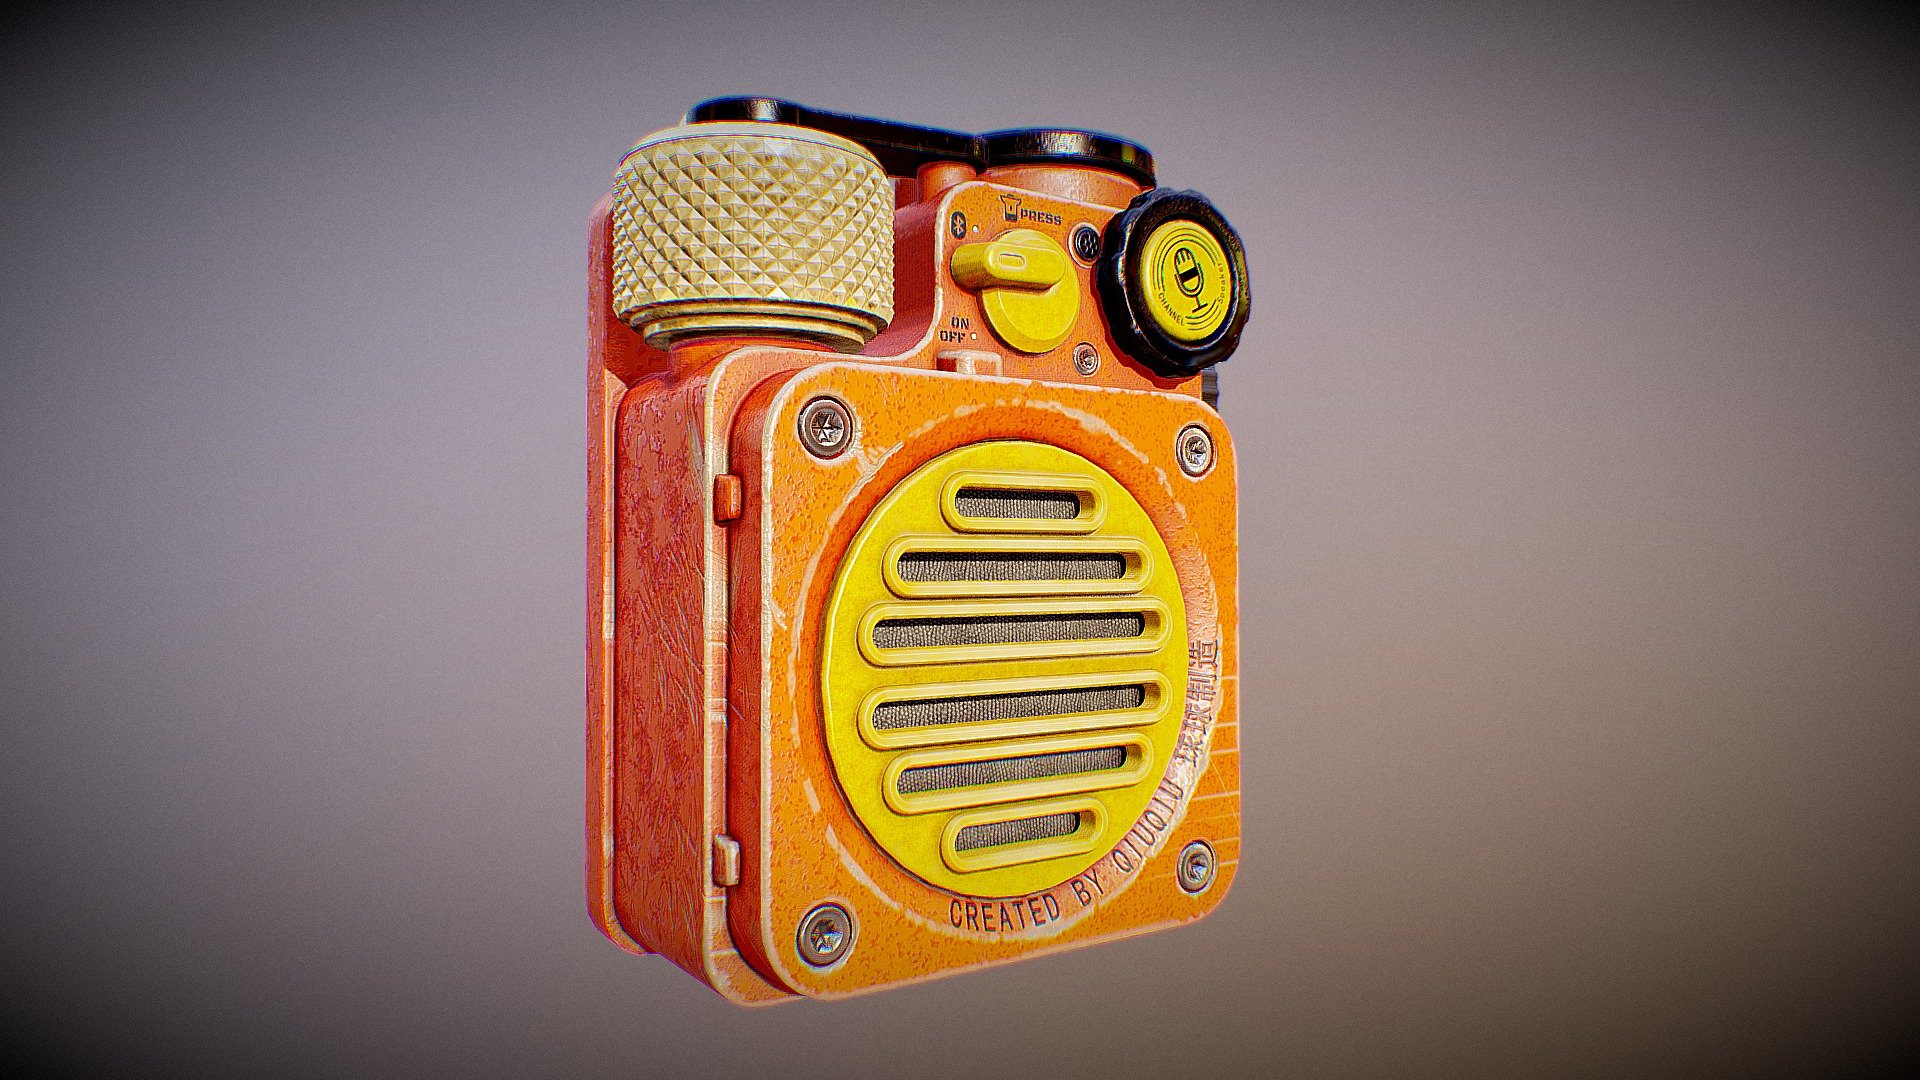 Modeled for one of my own favorite bluetooth radios. Modeled with Blender, Substance painter baked textures and made materials. Finally rendered in Blender. Contains 36 PBR textures, 20482048 resolution，and blender source files.
Hope you like it 3d model